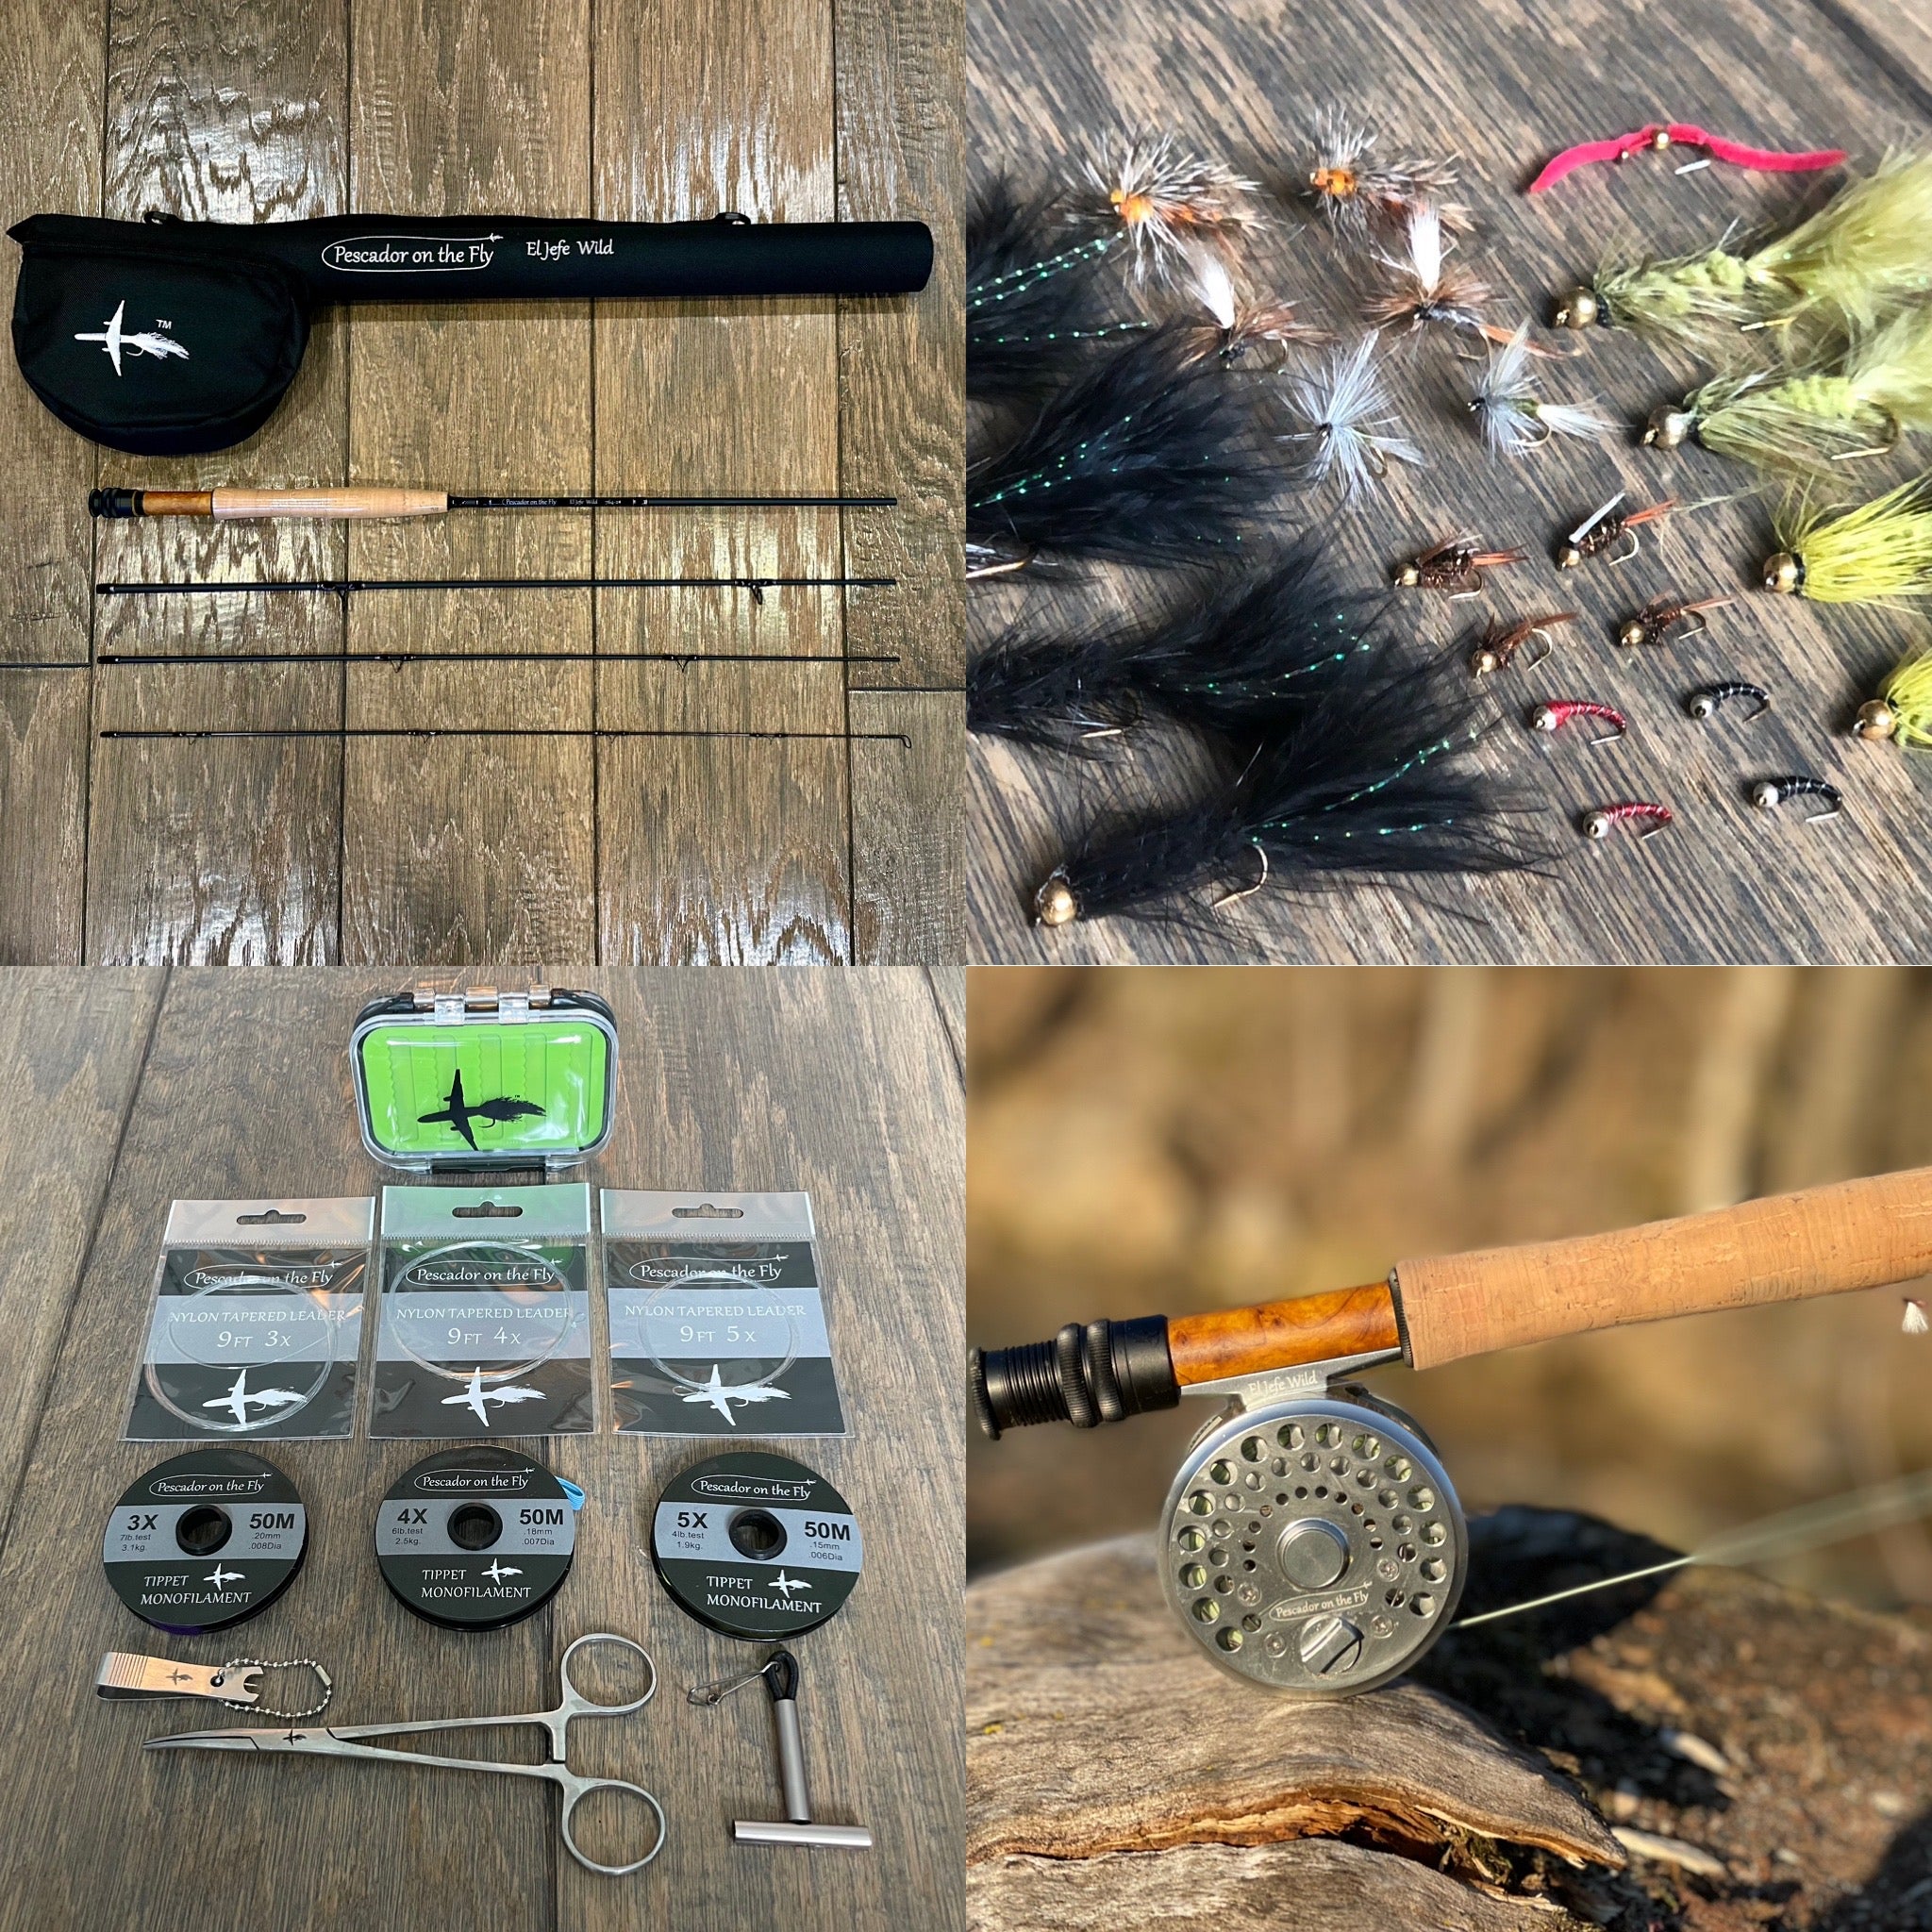 El Jefe Fly Fishing Combo Package | 766-4 | 7'6 Six Section 4 Weight Fly  Rod And Reel Outfit